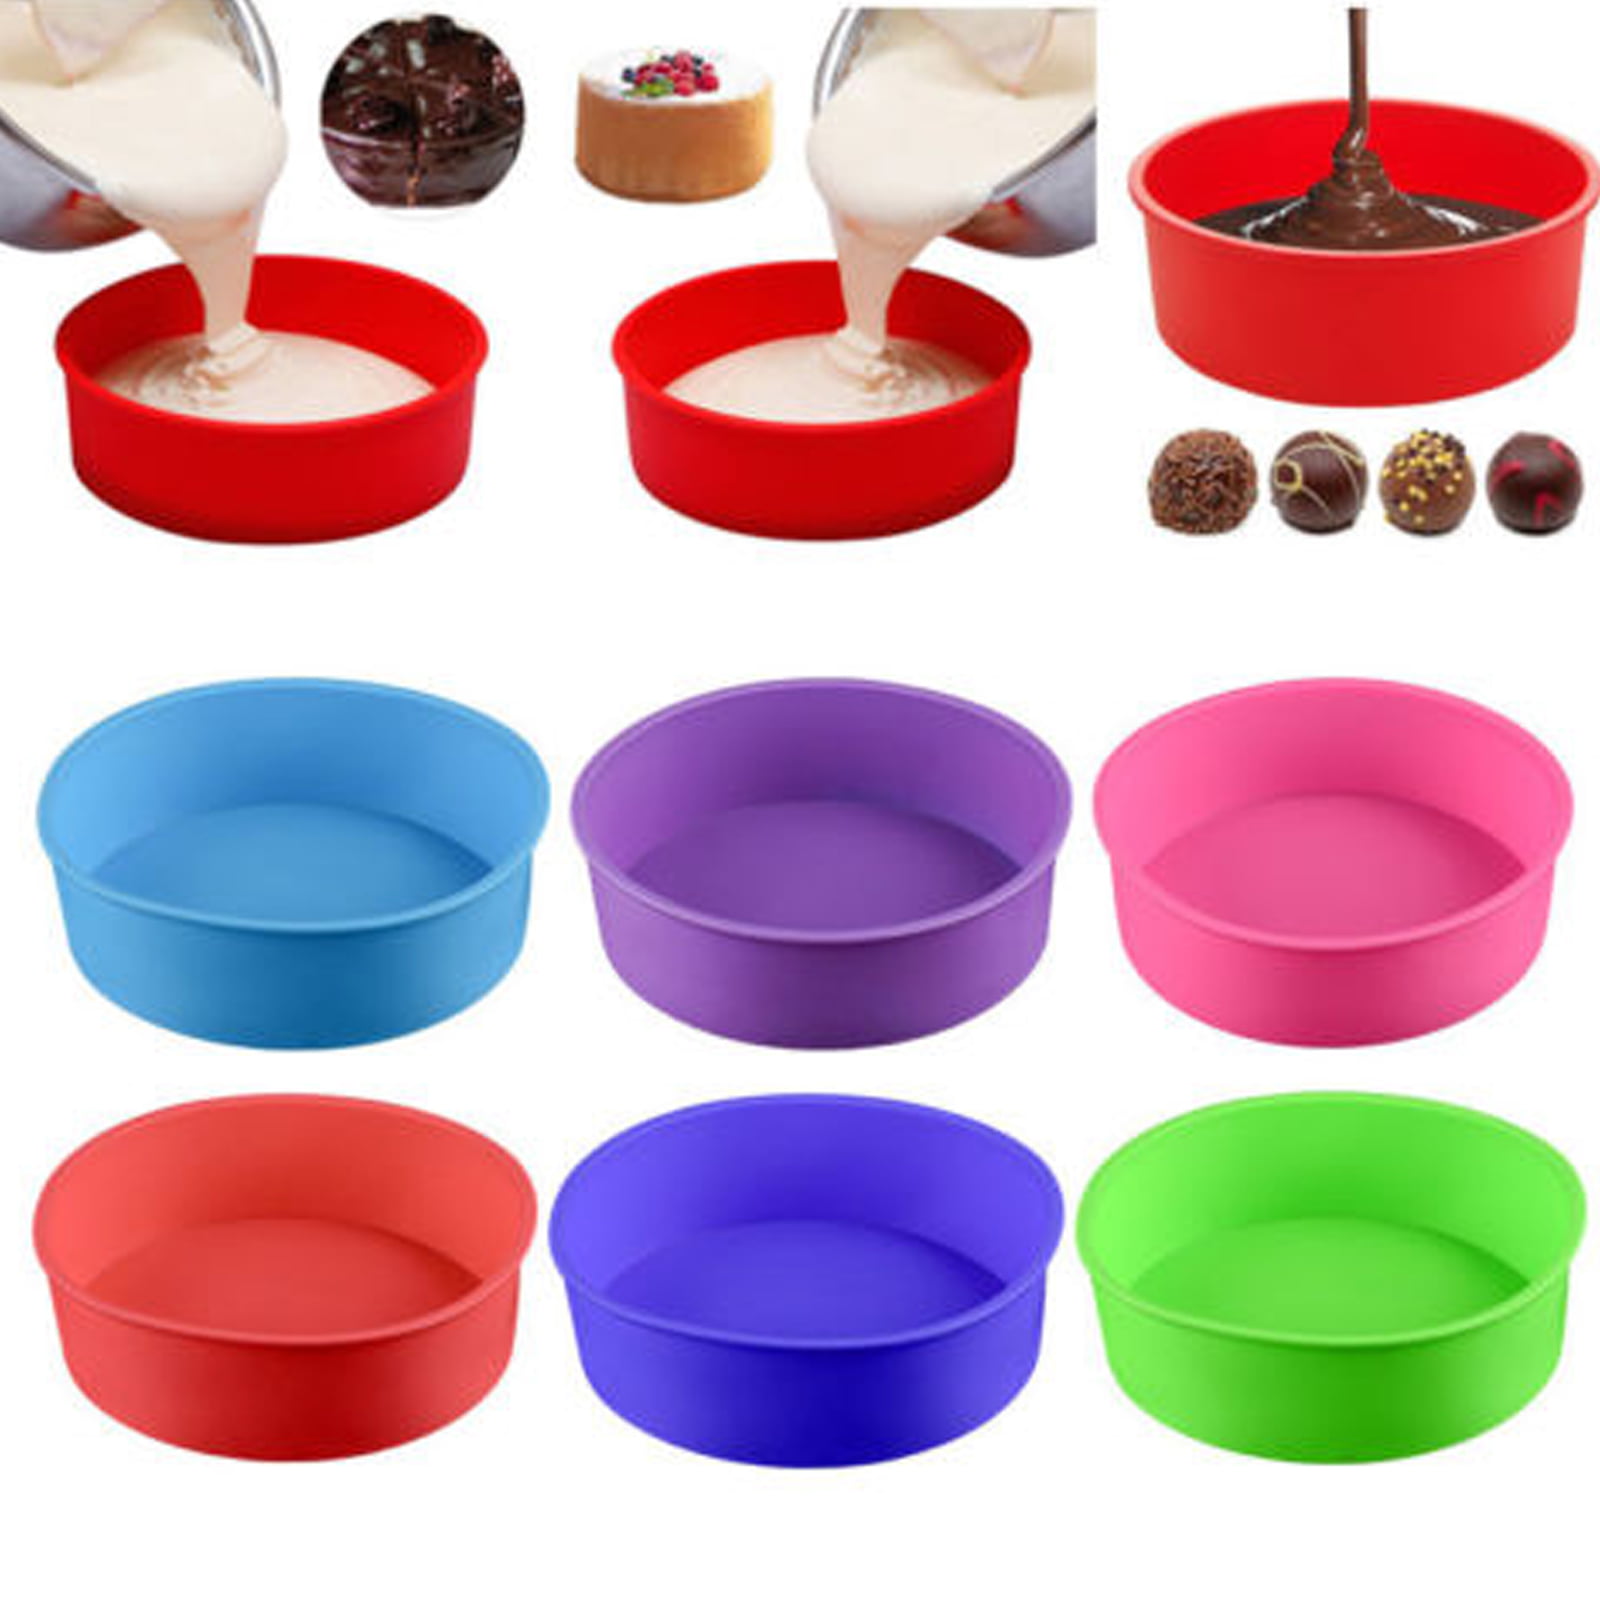 5"inch Silicone Round Cake Pudding Muffin Pizza Pie Pastry Baking Mould Pan Mold 